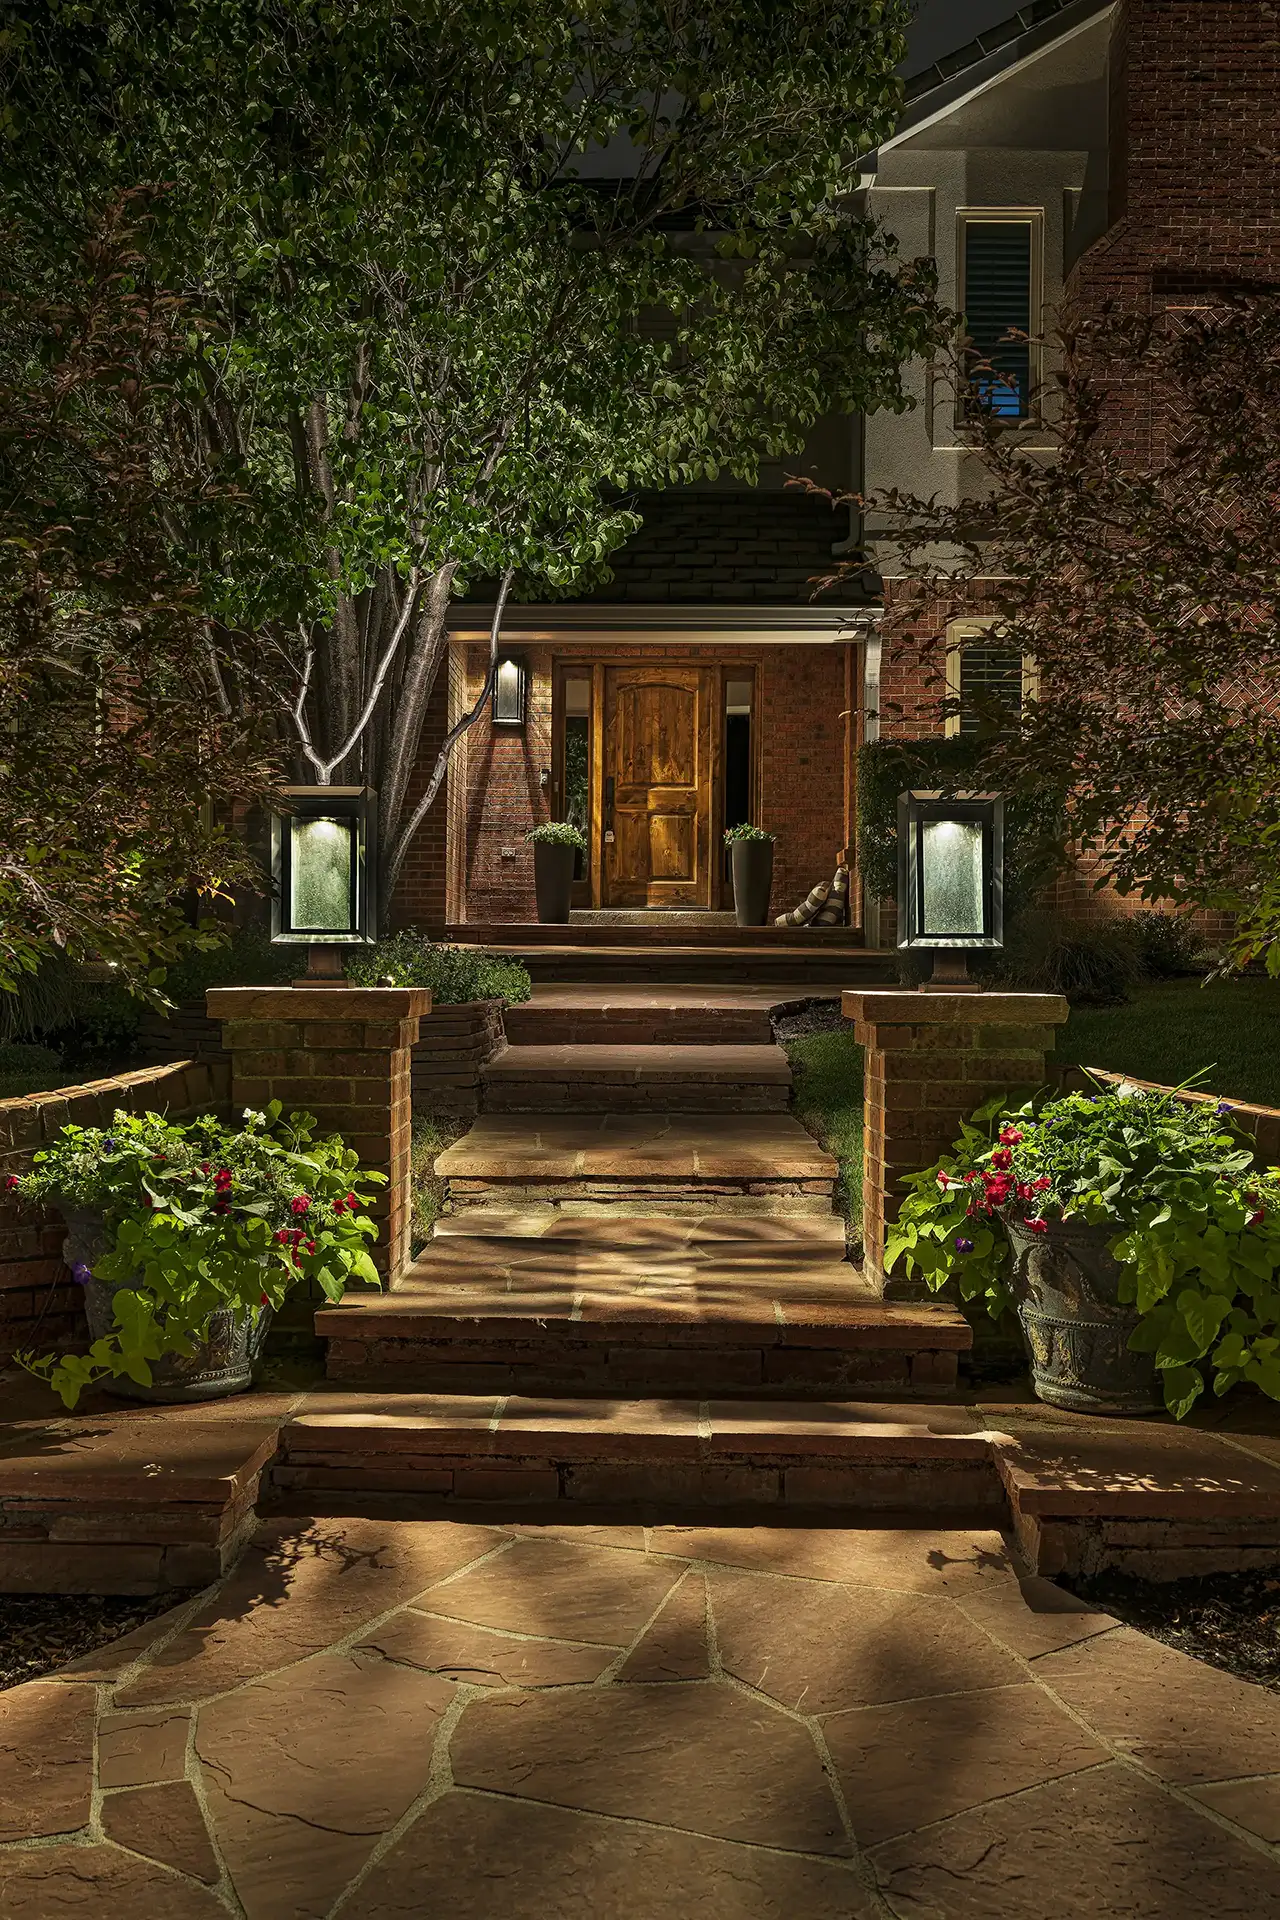 Durham St image 5 front walkway path Lighthouse Outdoor Lighting and Audio Denver CO